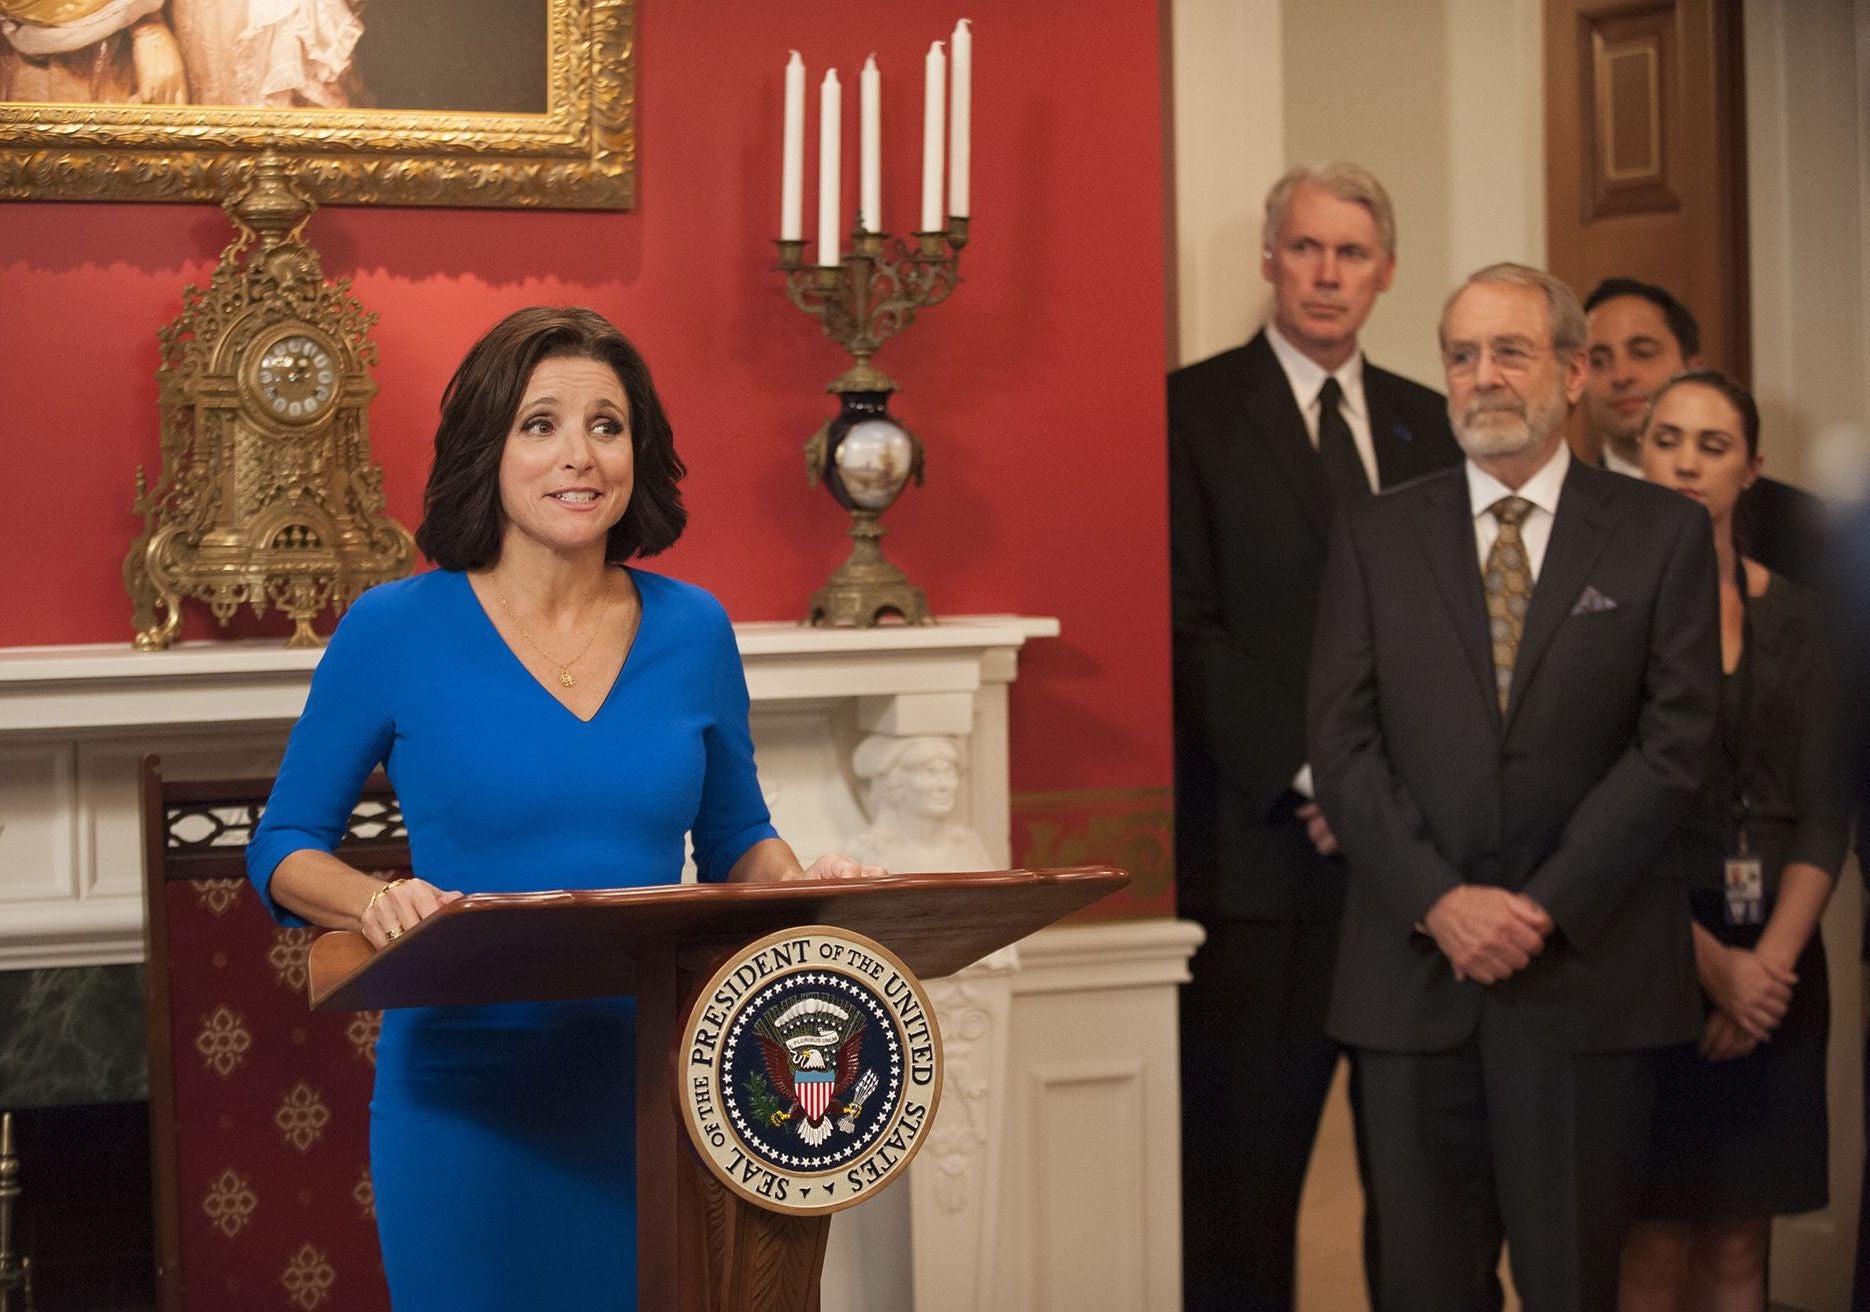 Julia Louis-Dreyfus in ‘Veep’, the show for which Quantick won an Emmy in 2019